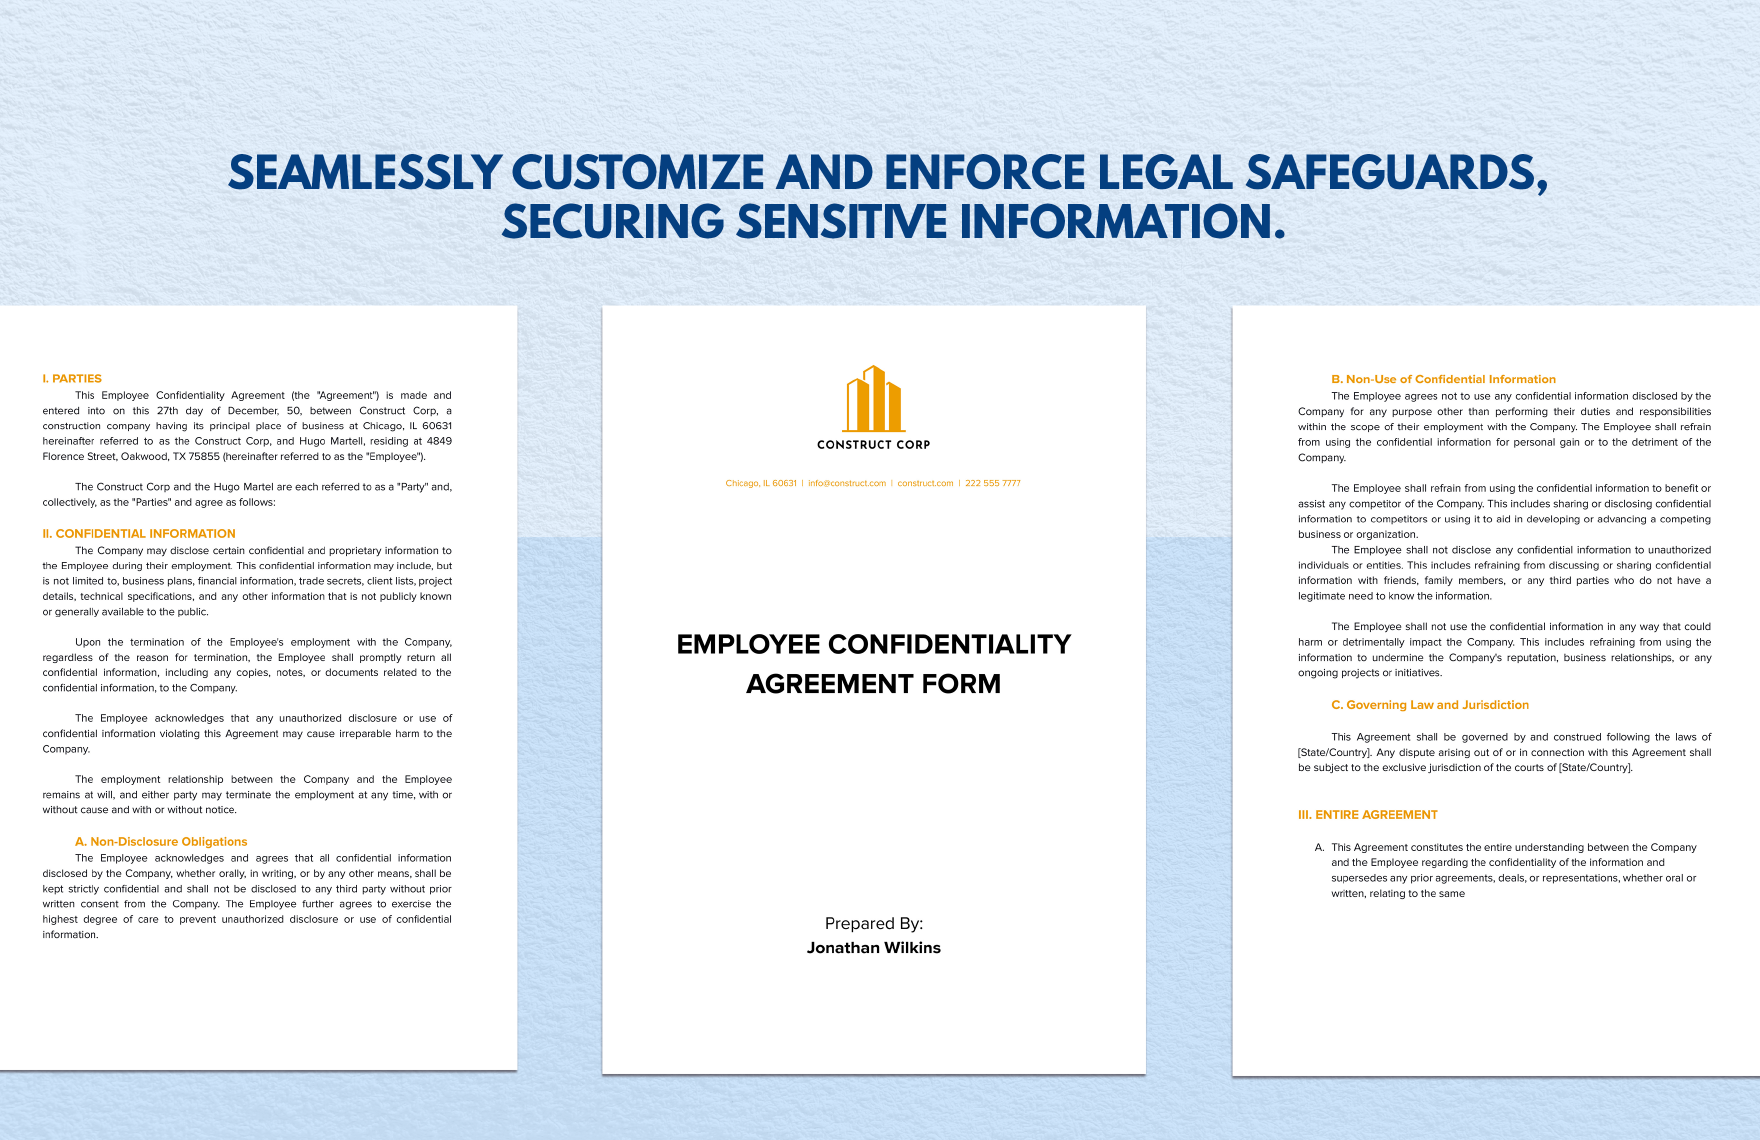 Employee Confidentiality Agreement Form 